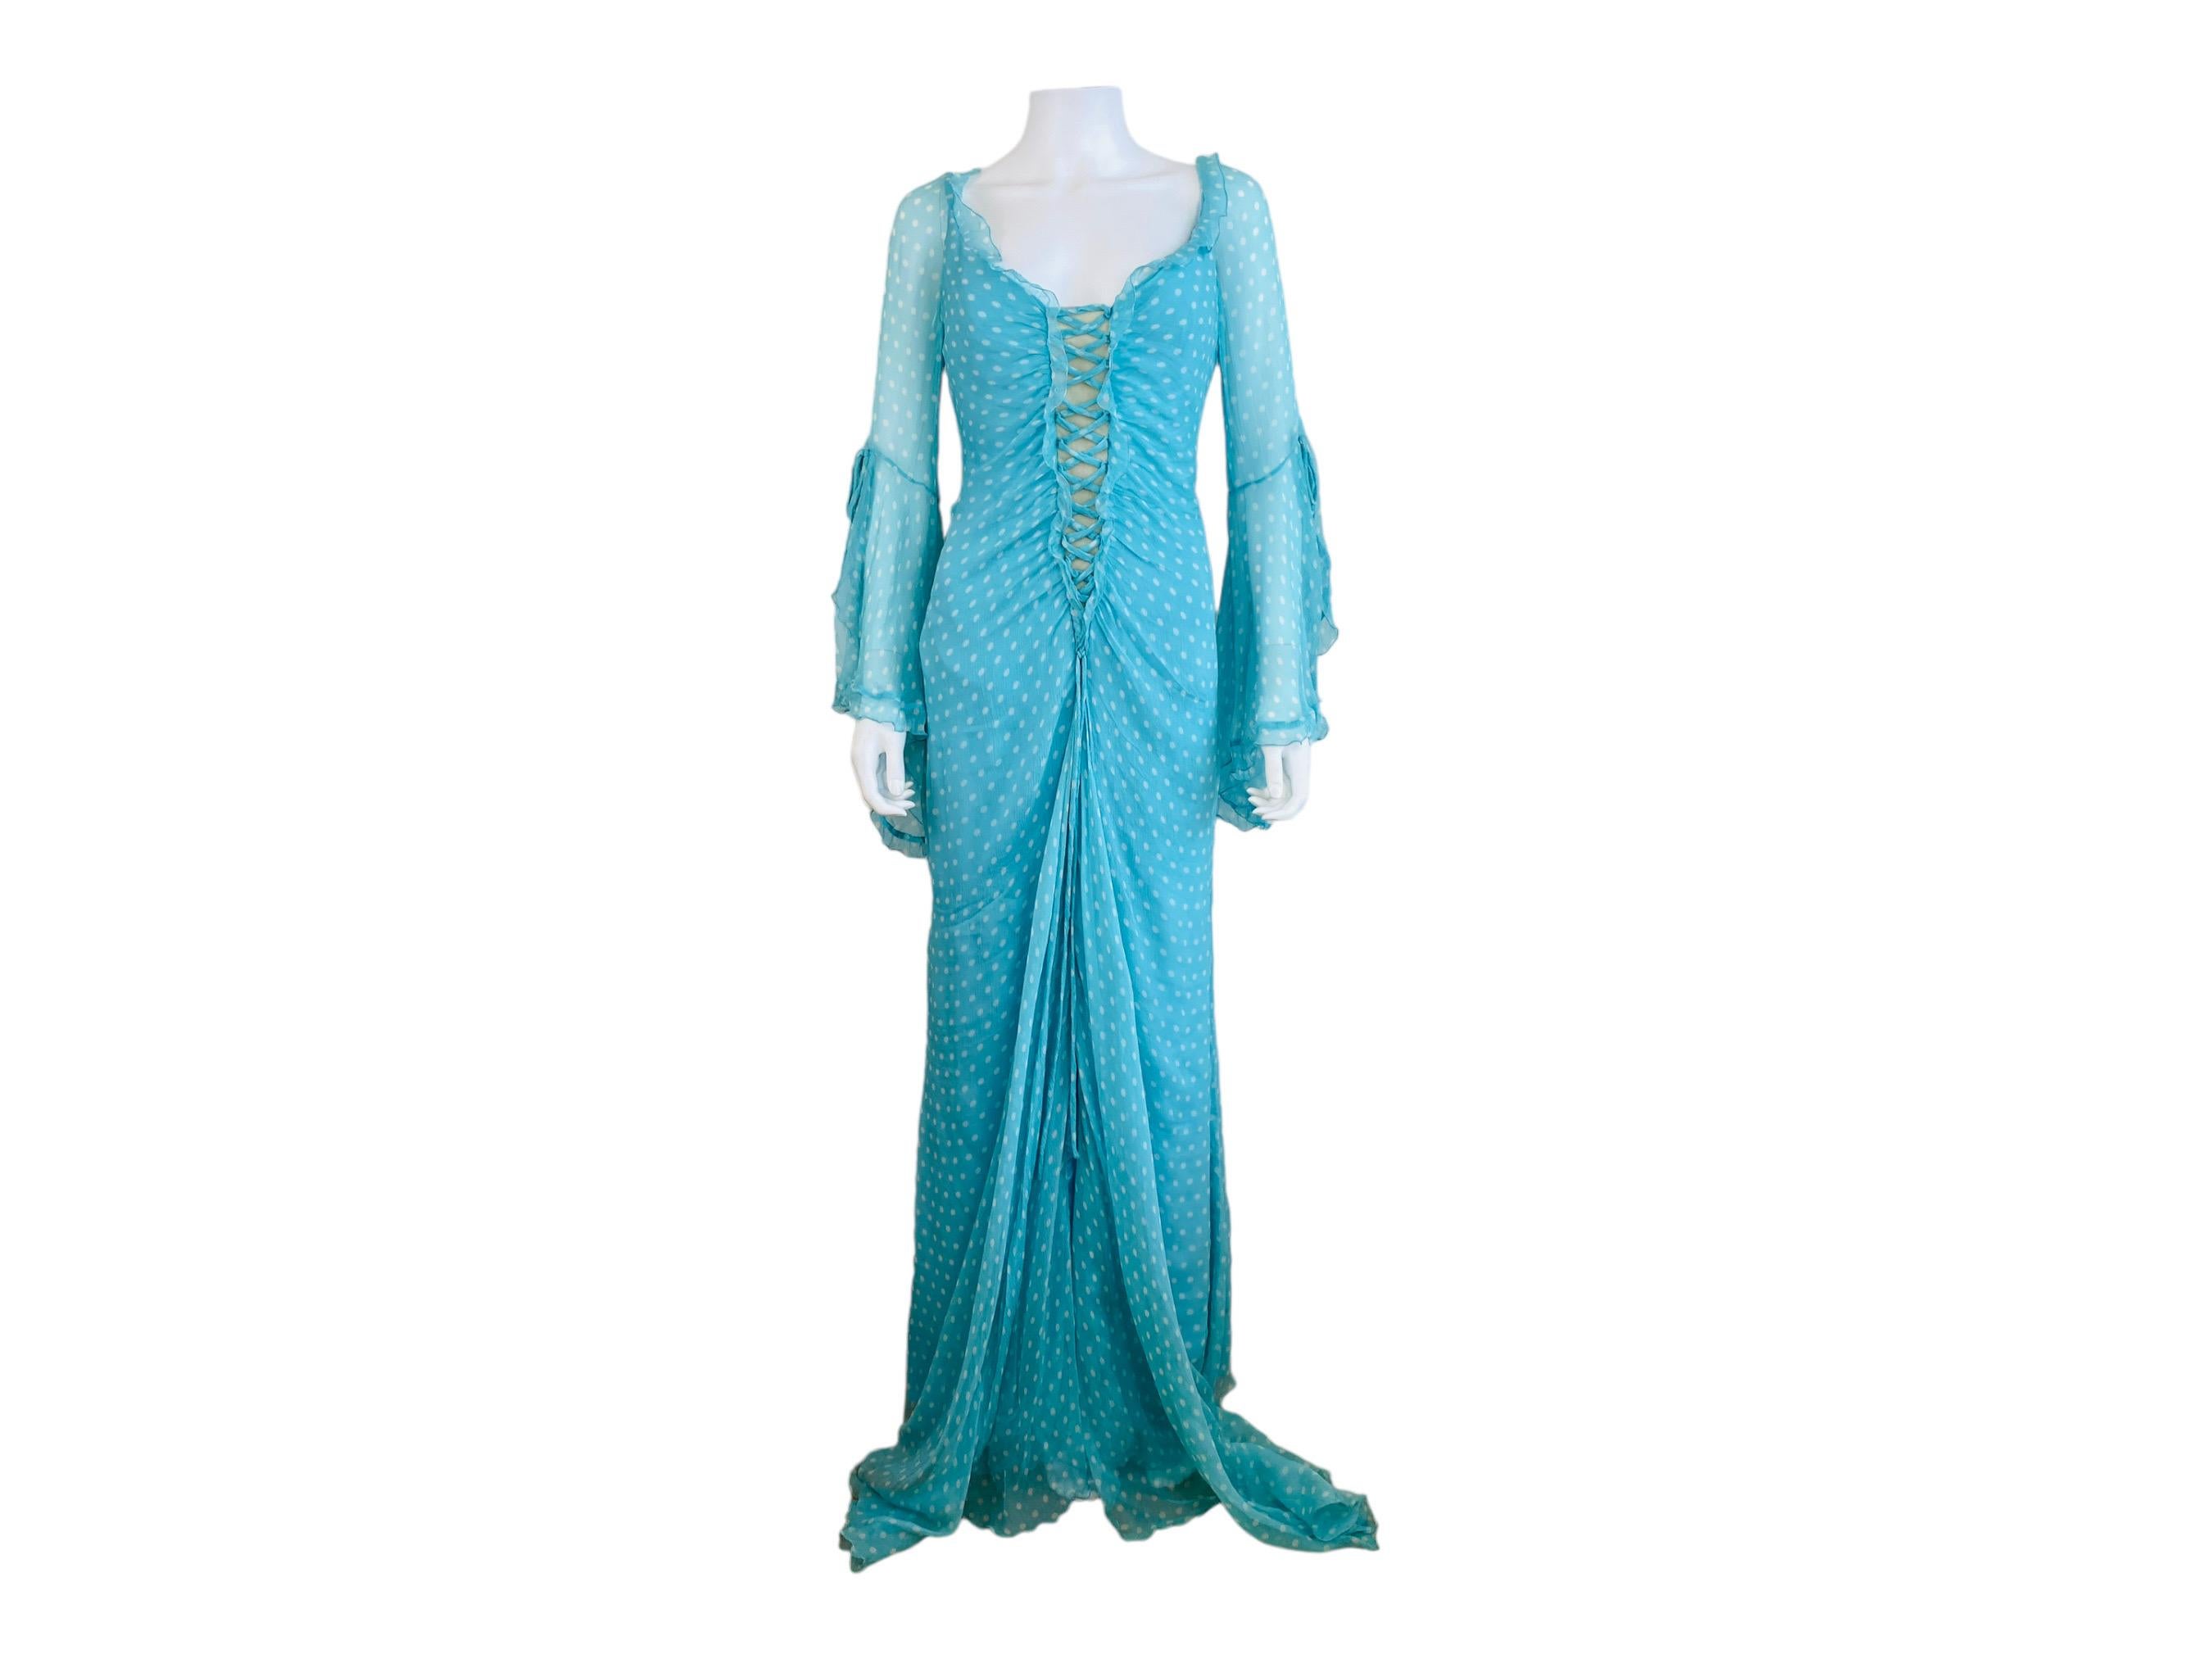 Vintage Bellville Sassoon Turquoise Blue Polka Dot Silk Gown Dress In Excellent Condition For Sale In Denver, CO